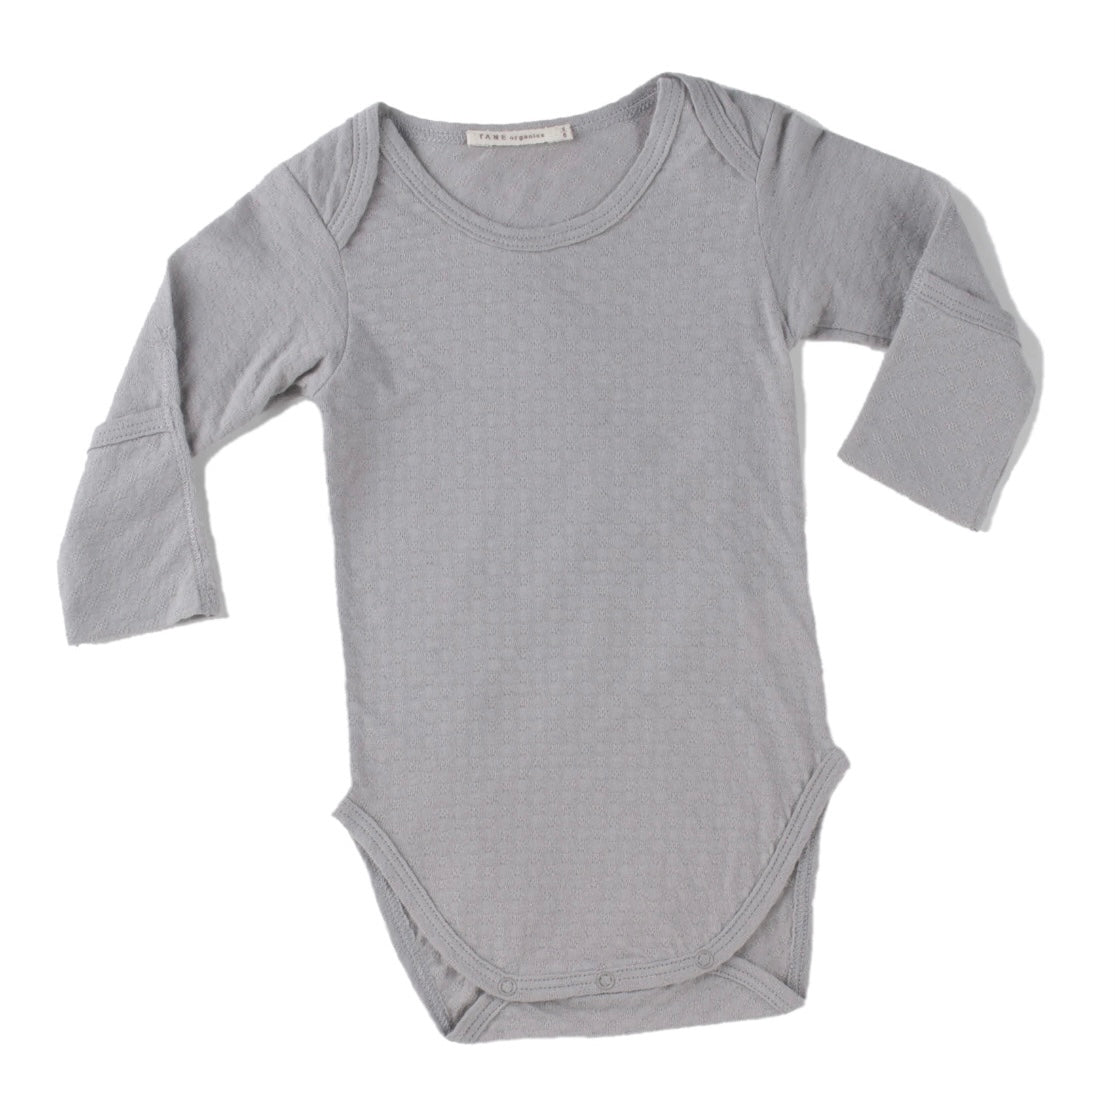 cool grey pointelle essential crewneck onesie with handcover.  100% organic cotton.